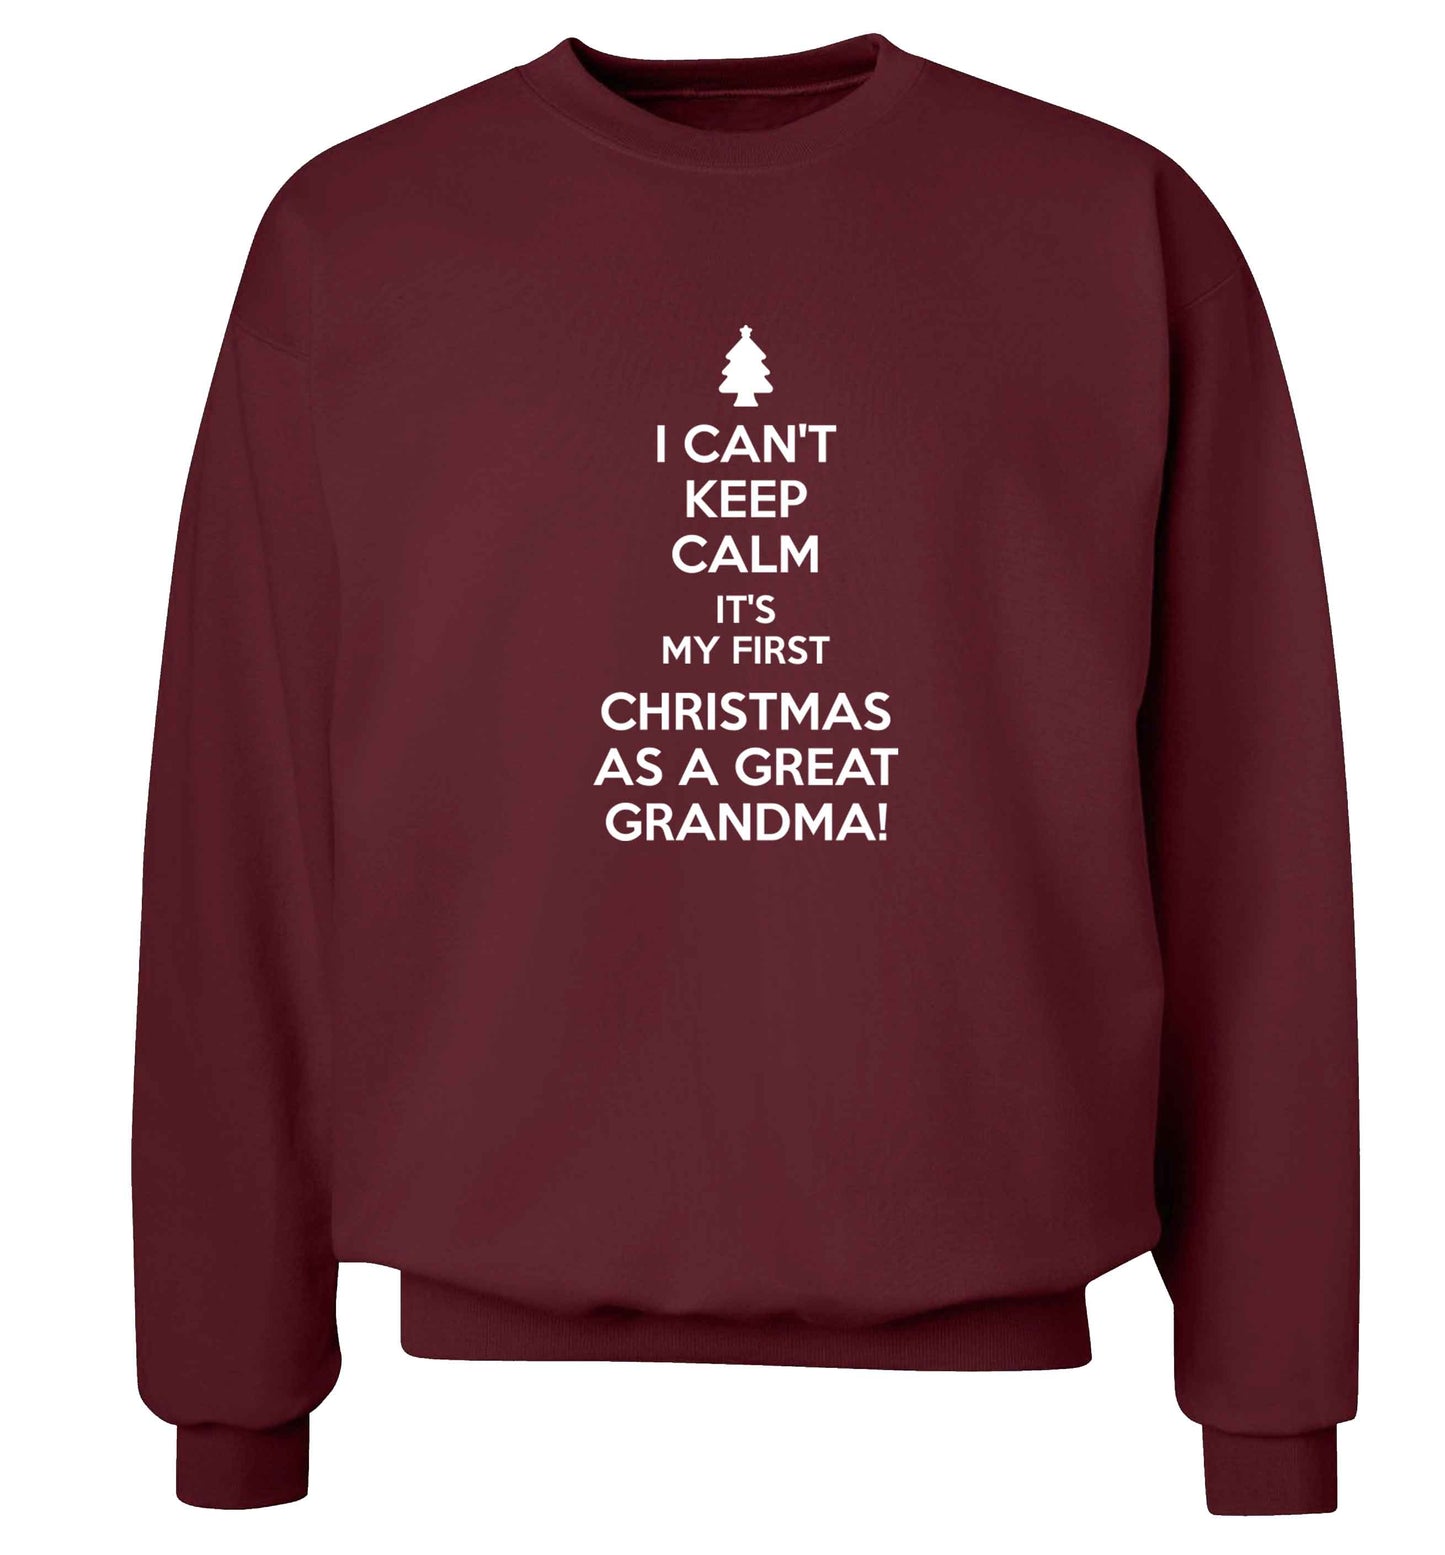 I can't keep calm it's my first Christmas as a great grandma! Adult's unisex maroon Sweater 2XL